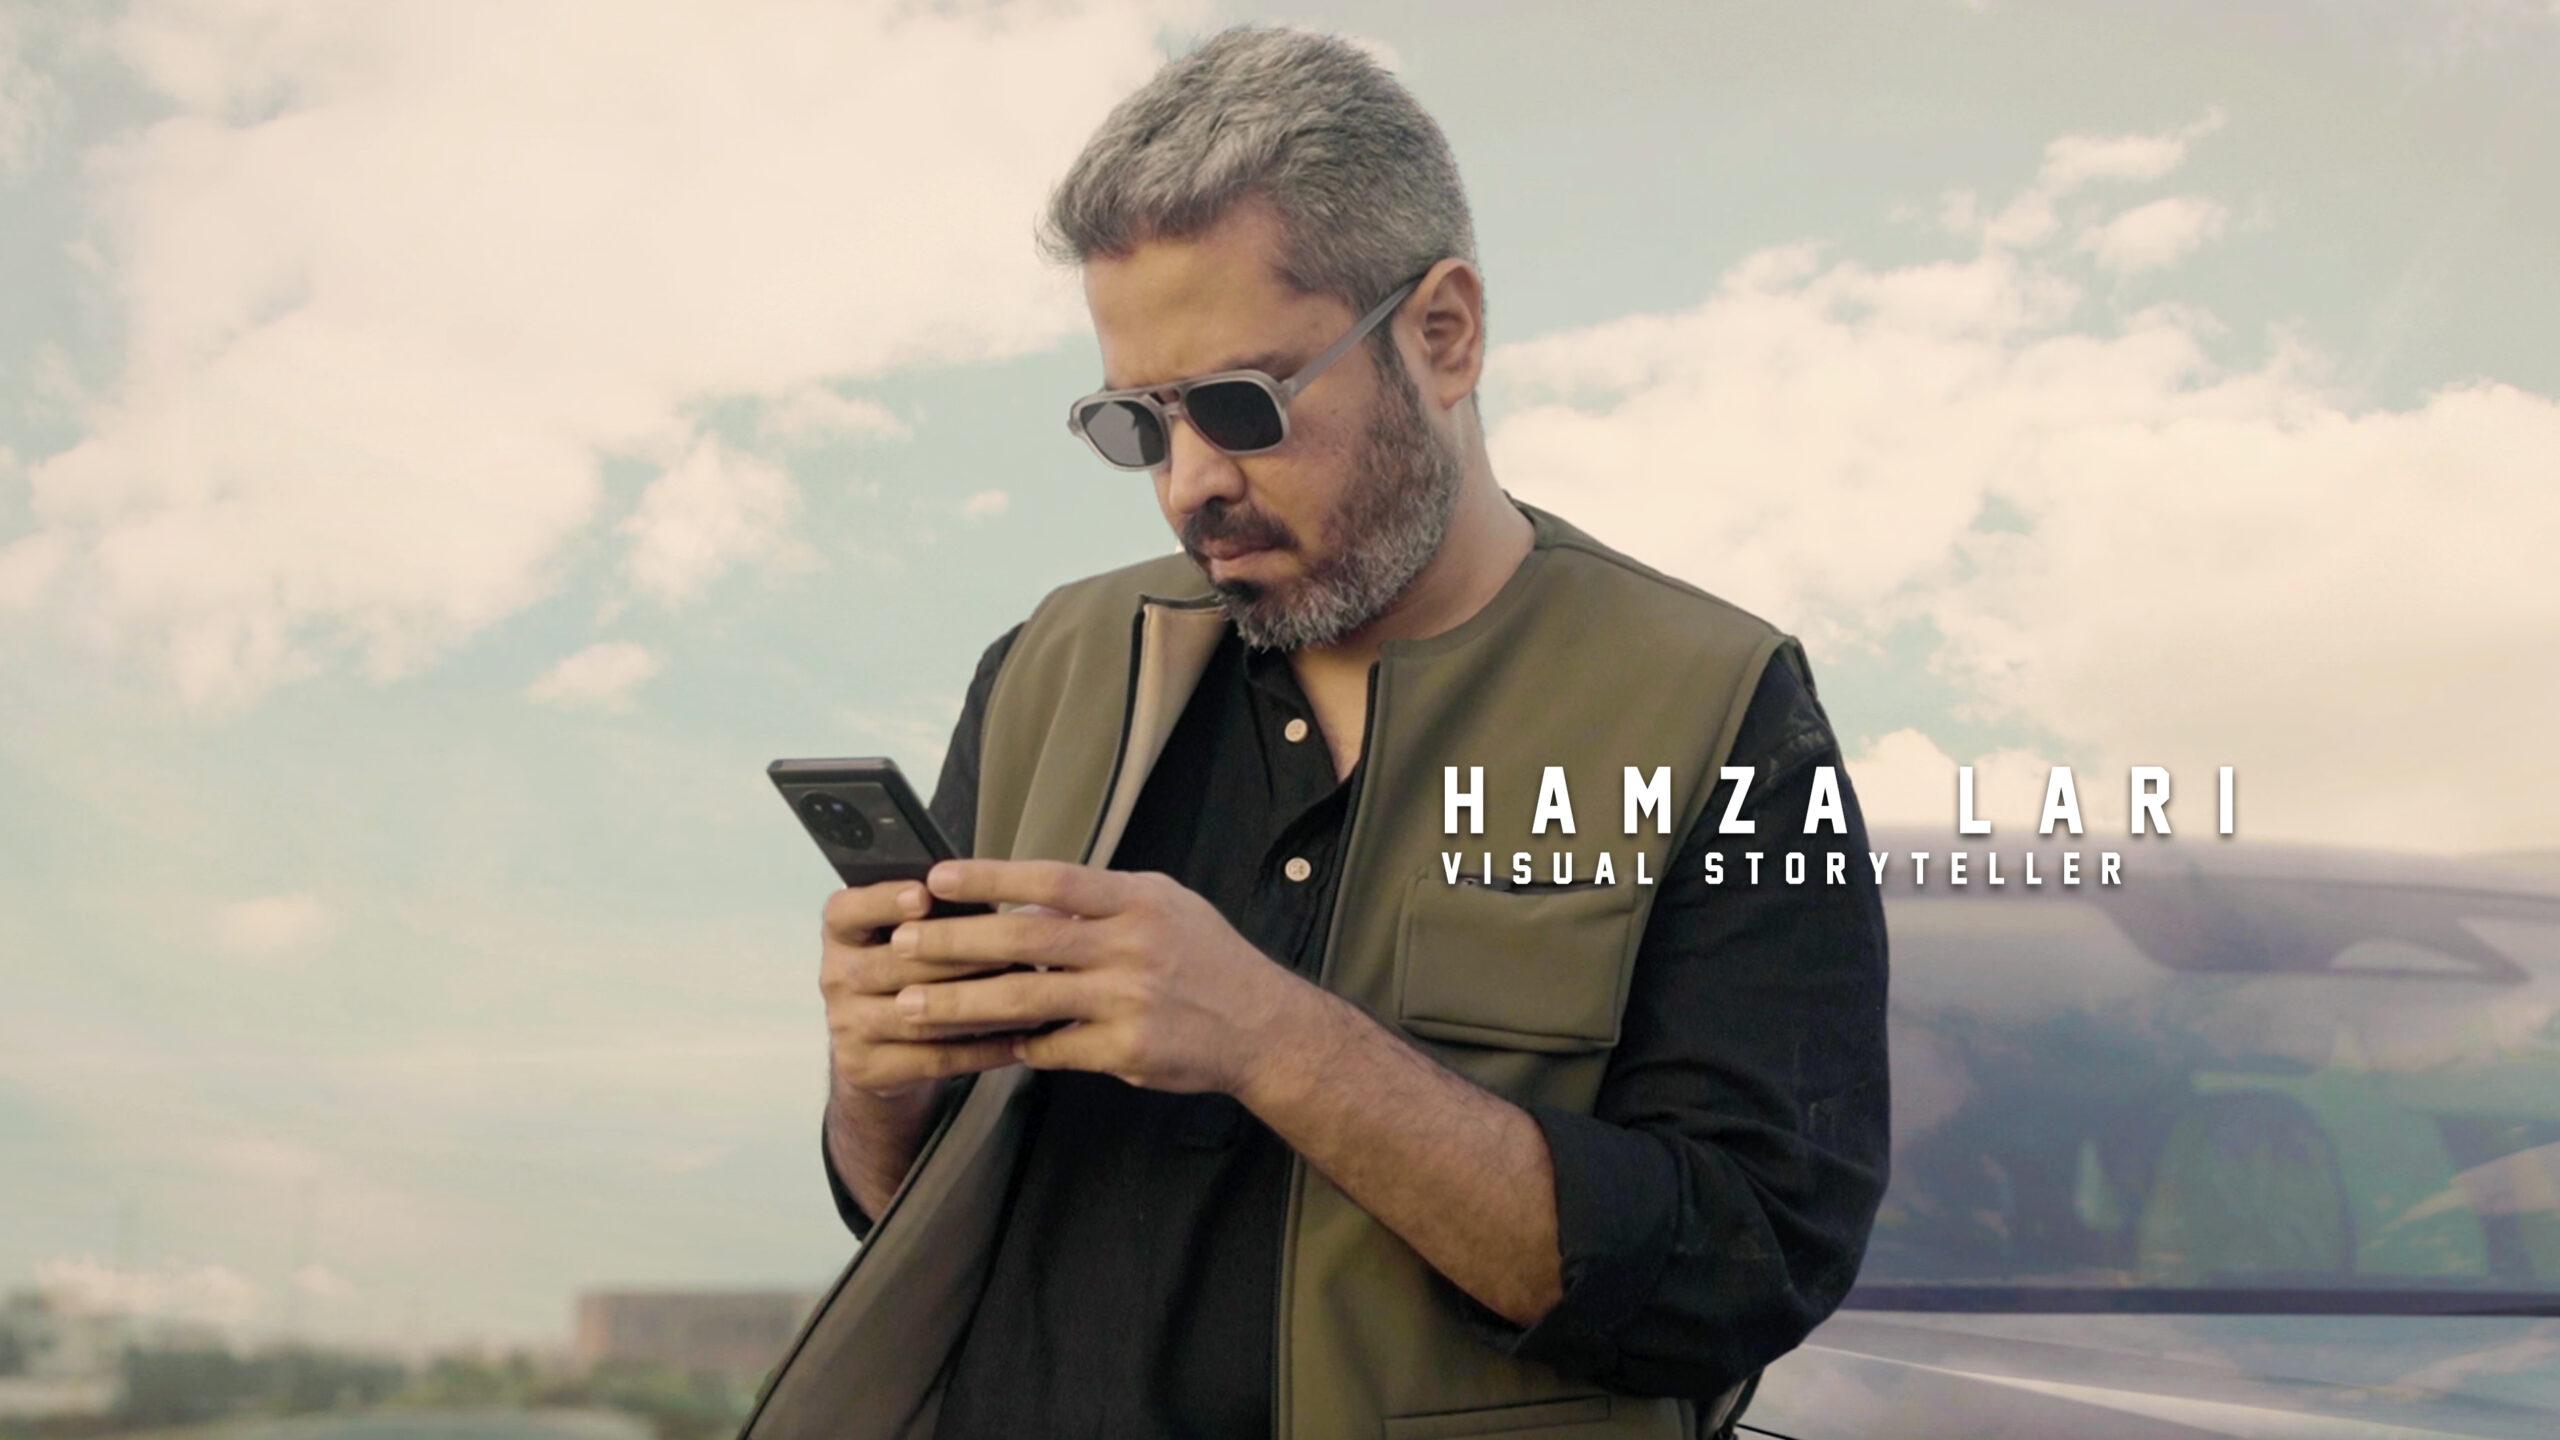 vivo Announced an Exciting Short Film Projectwith An Ace Director Hamza Lari in Pakistan to Bring Mobile Filmmaking Vision to Reality